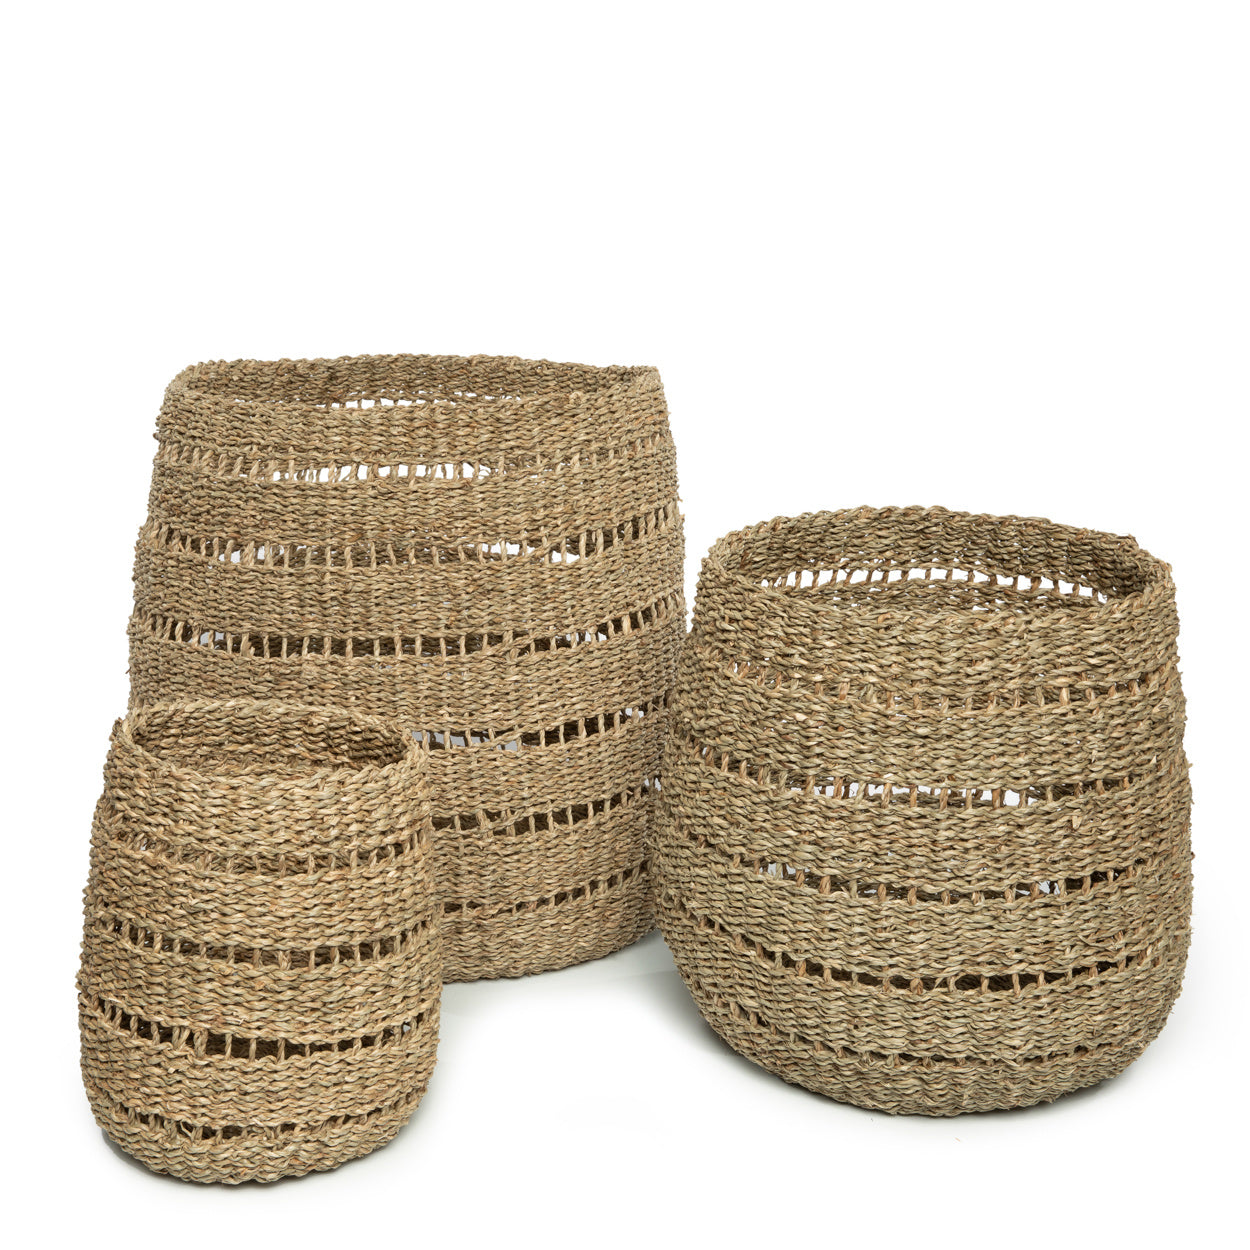 THE NINH BINH Baskets Set of 3 front view